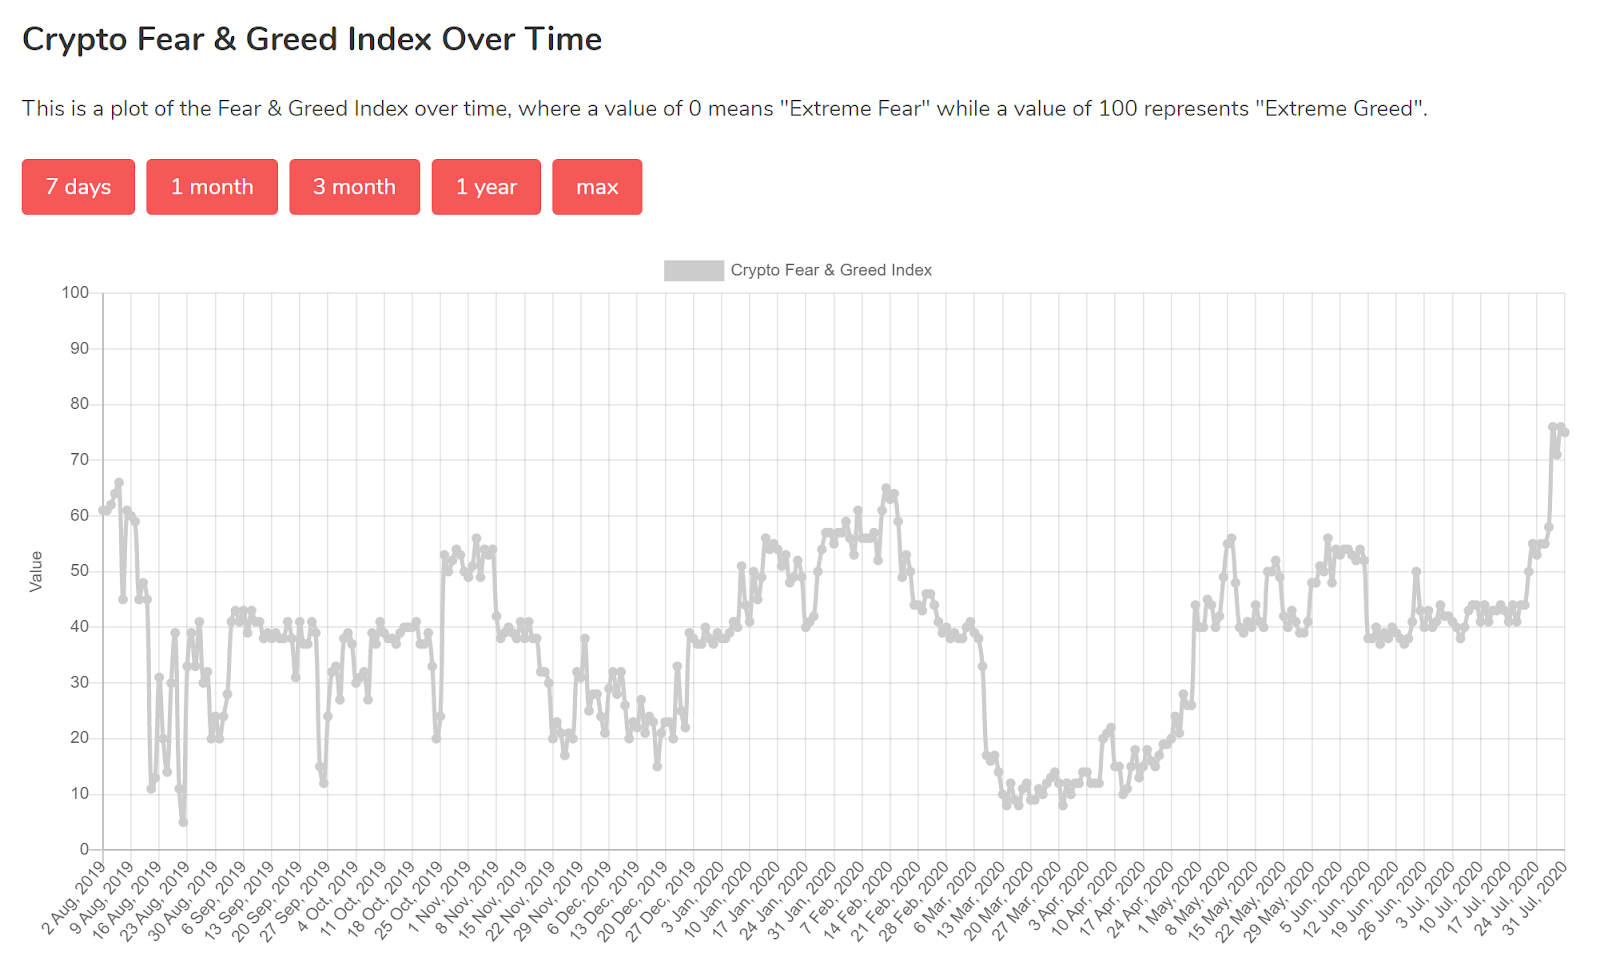 The Crypto Fear & Greed Index 1-year chart